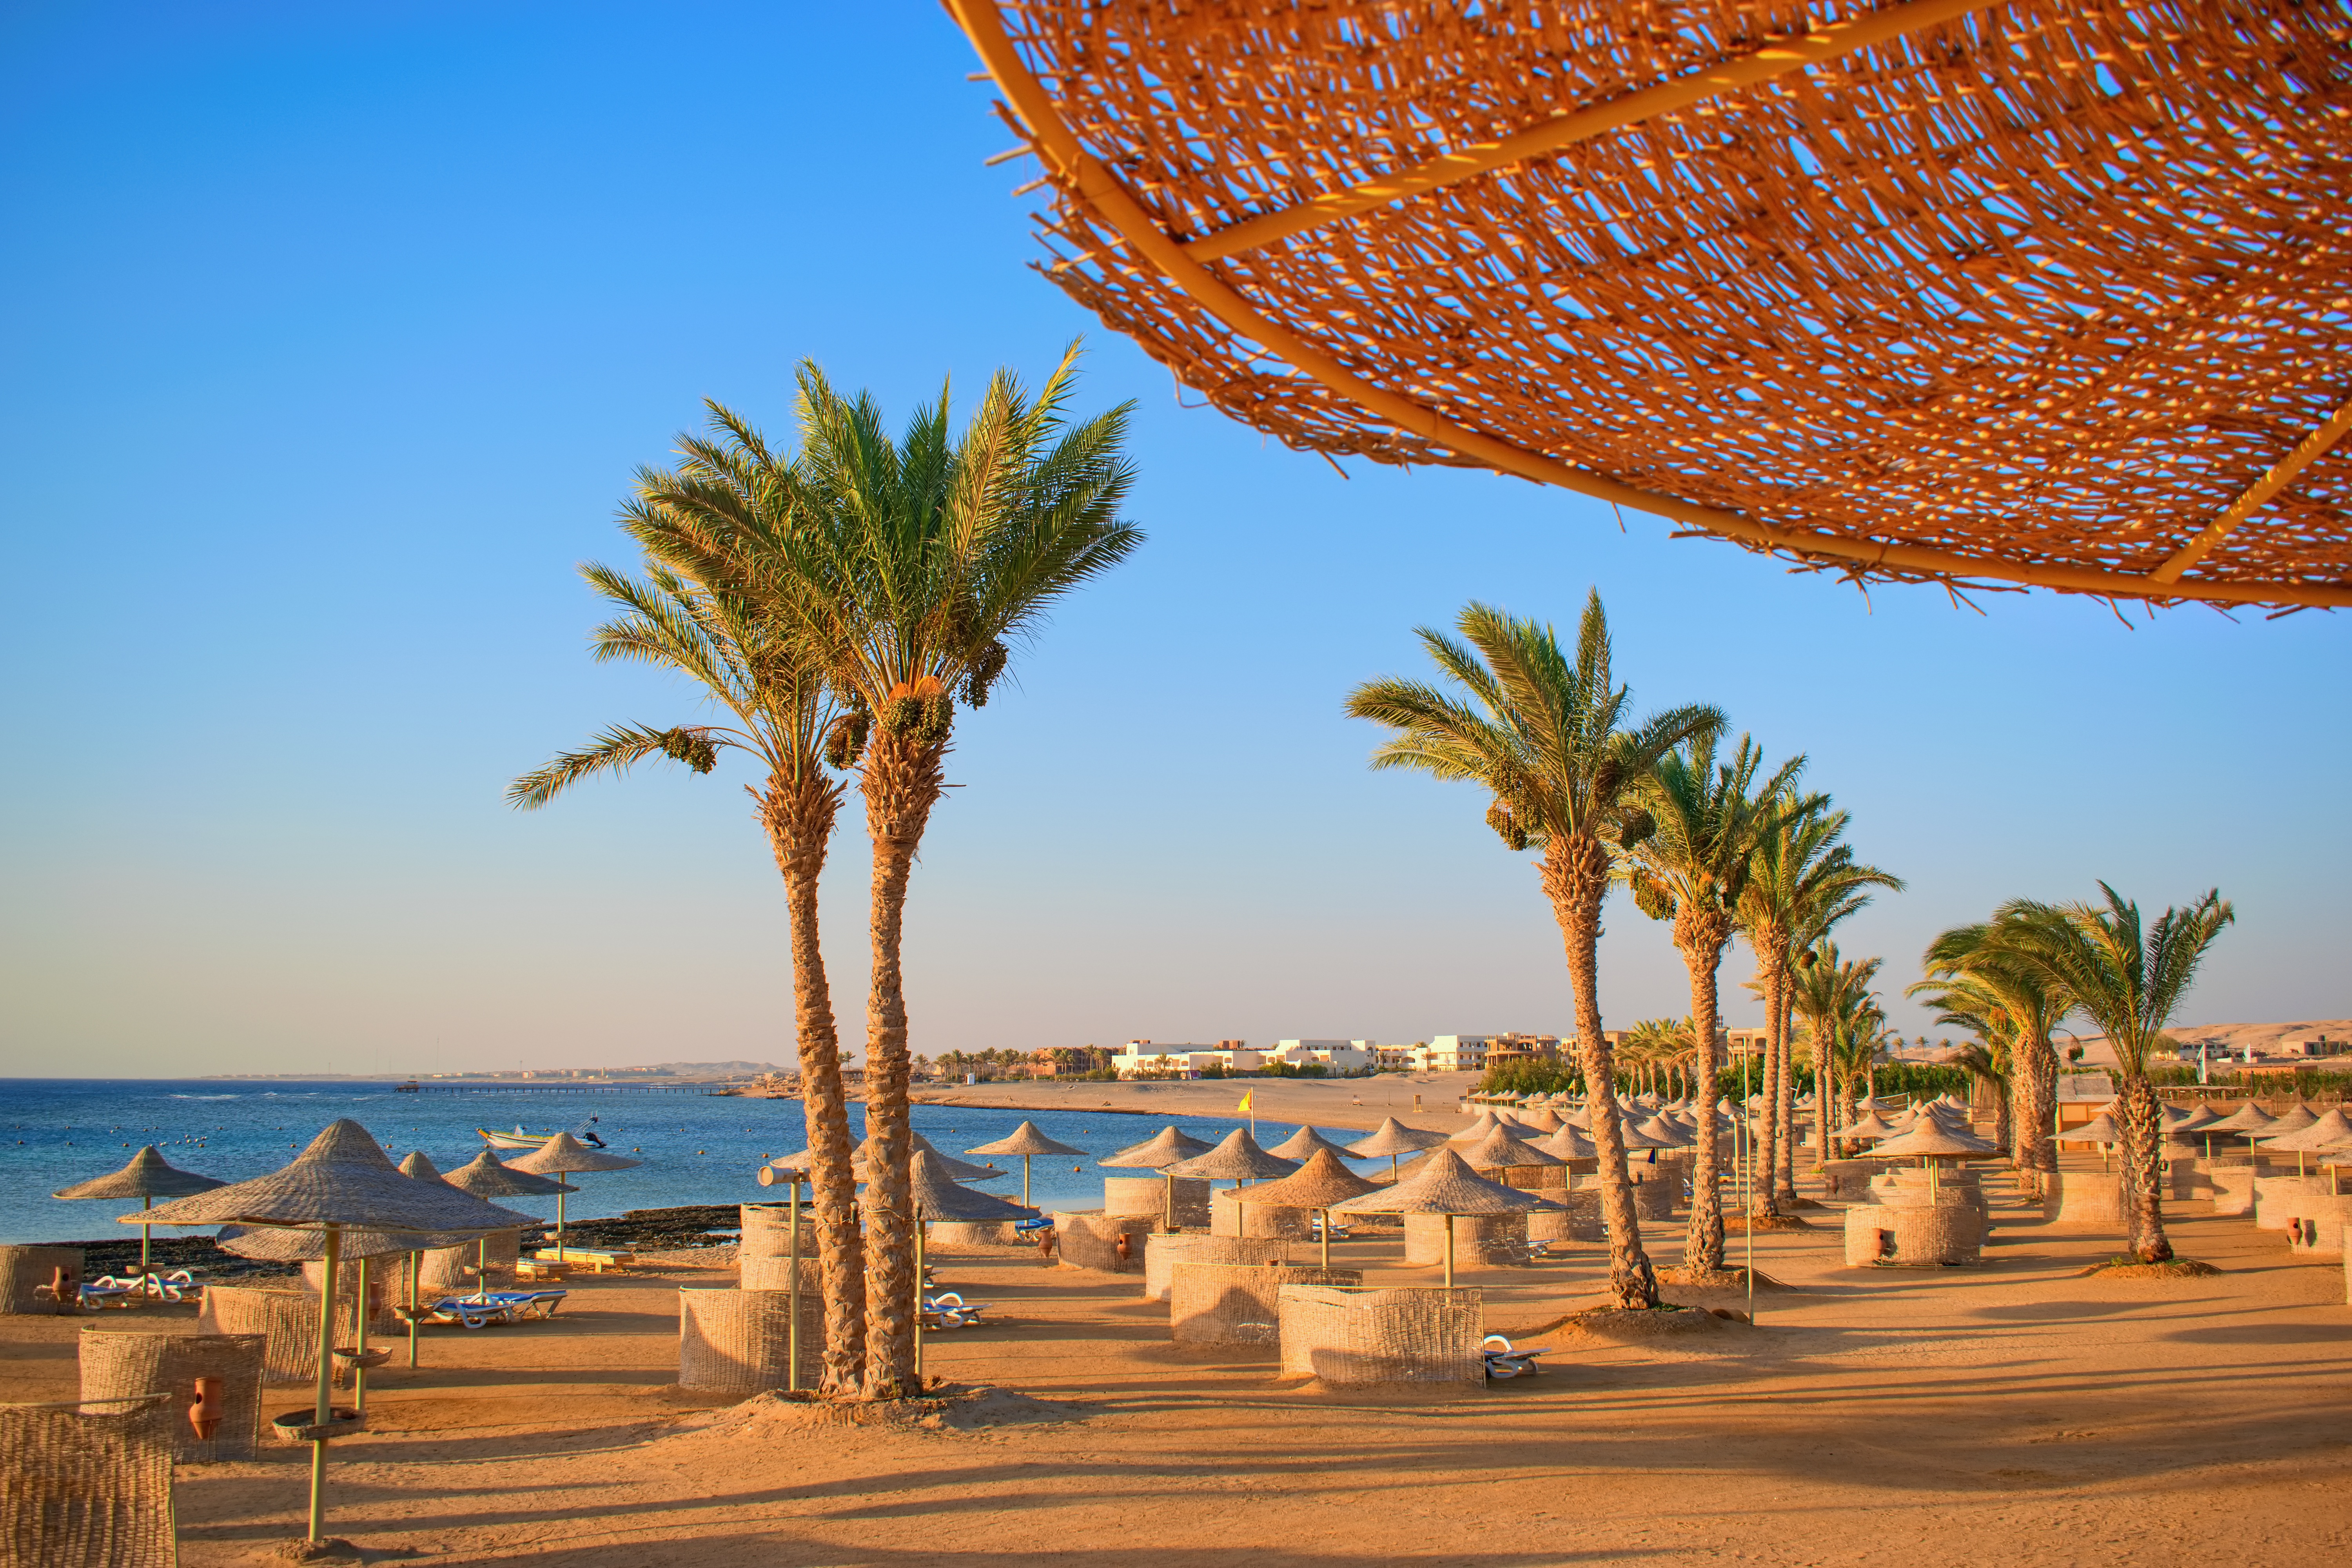 Set in the south of Egypt, Marsa Alam is around 200 miles from Hurghada